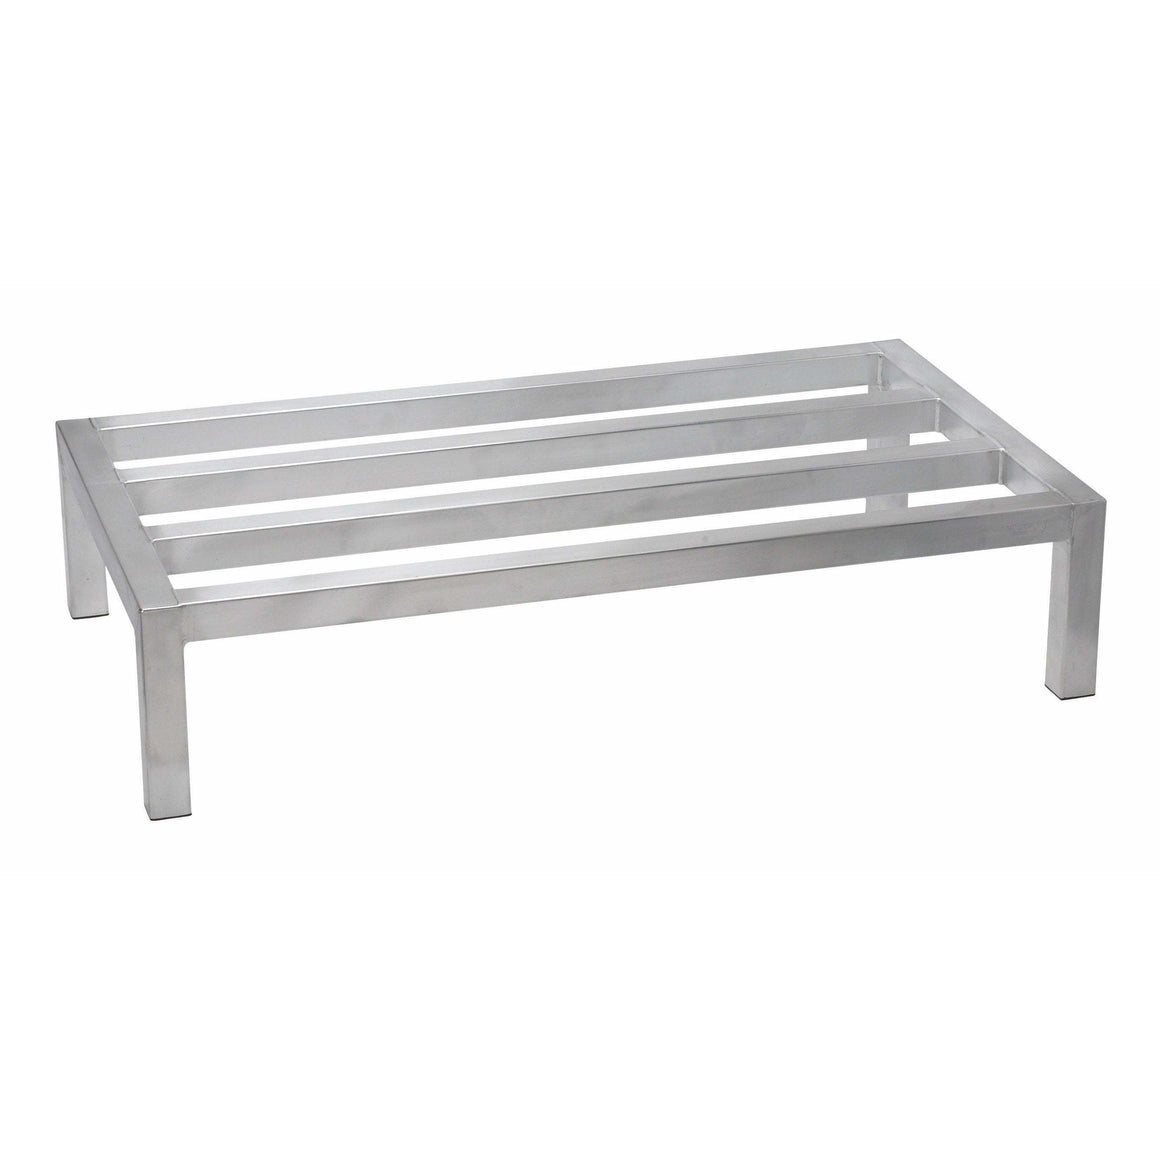 Winco - ASDR-2060 - Dunnage Rack, 20" x 60" x 8", Aluminum - Shelving - Maltese & Co New and Used  restaurant Equipment 